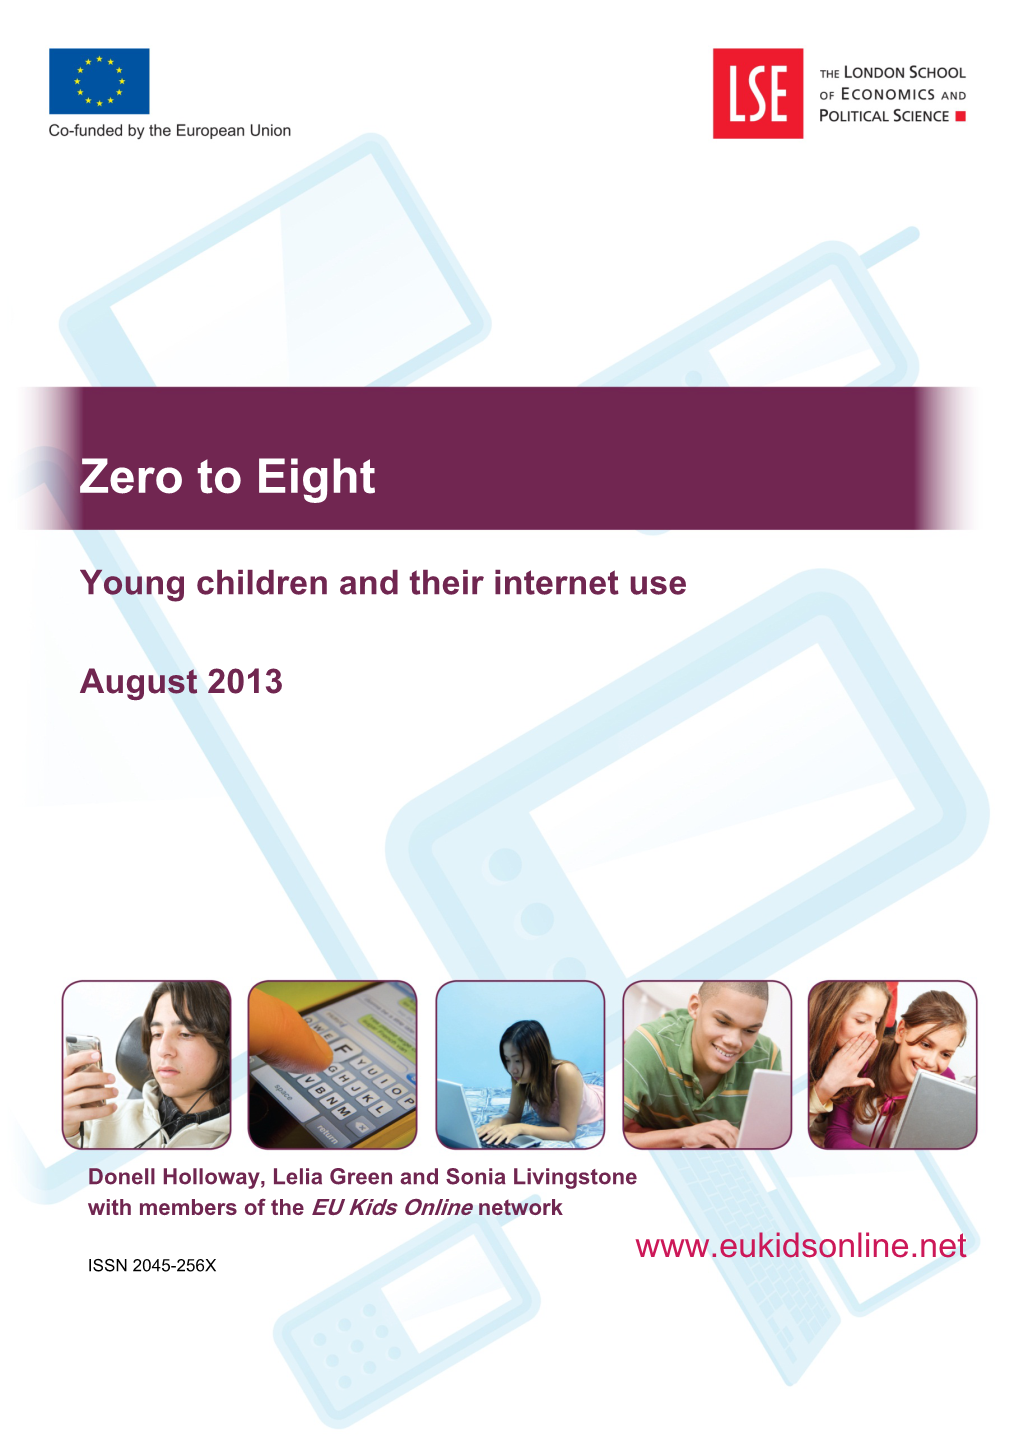 Zero to Eight: Young Children and Their Internet Use